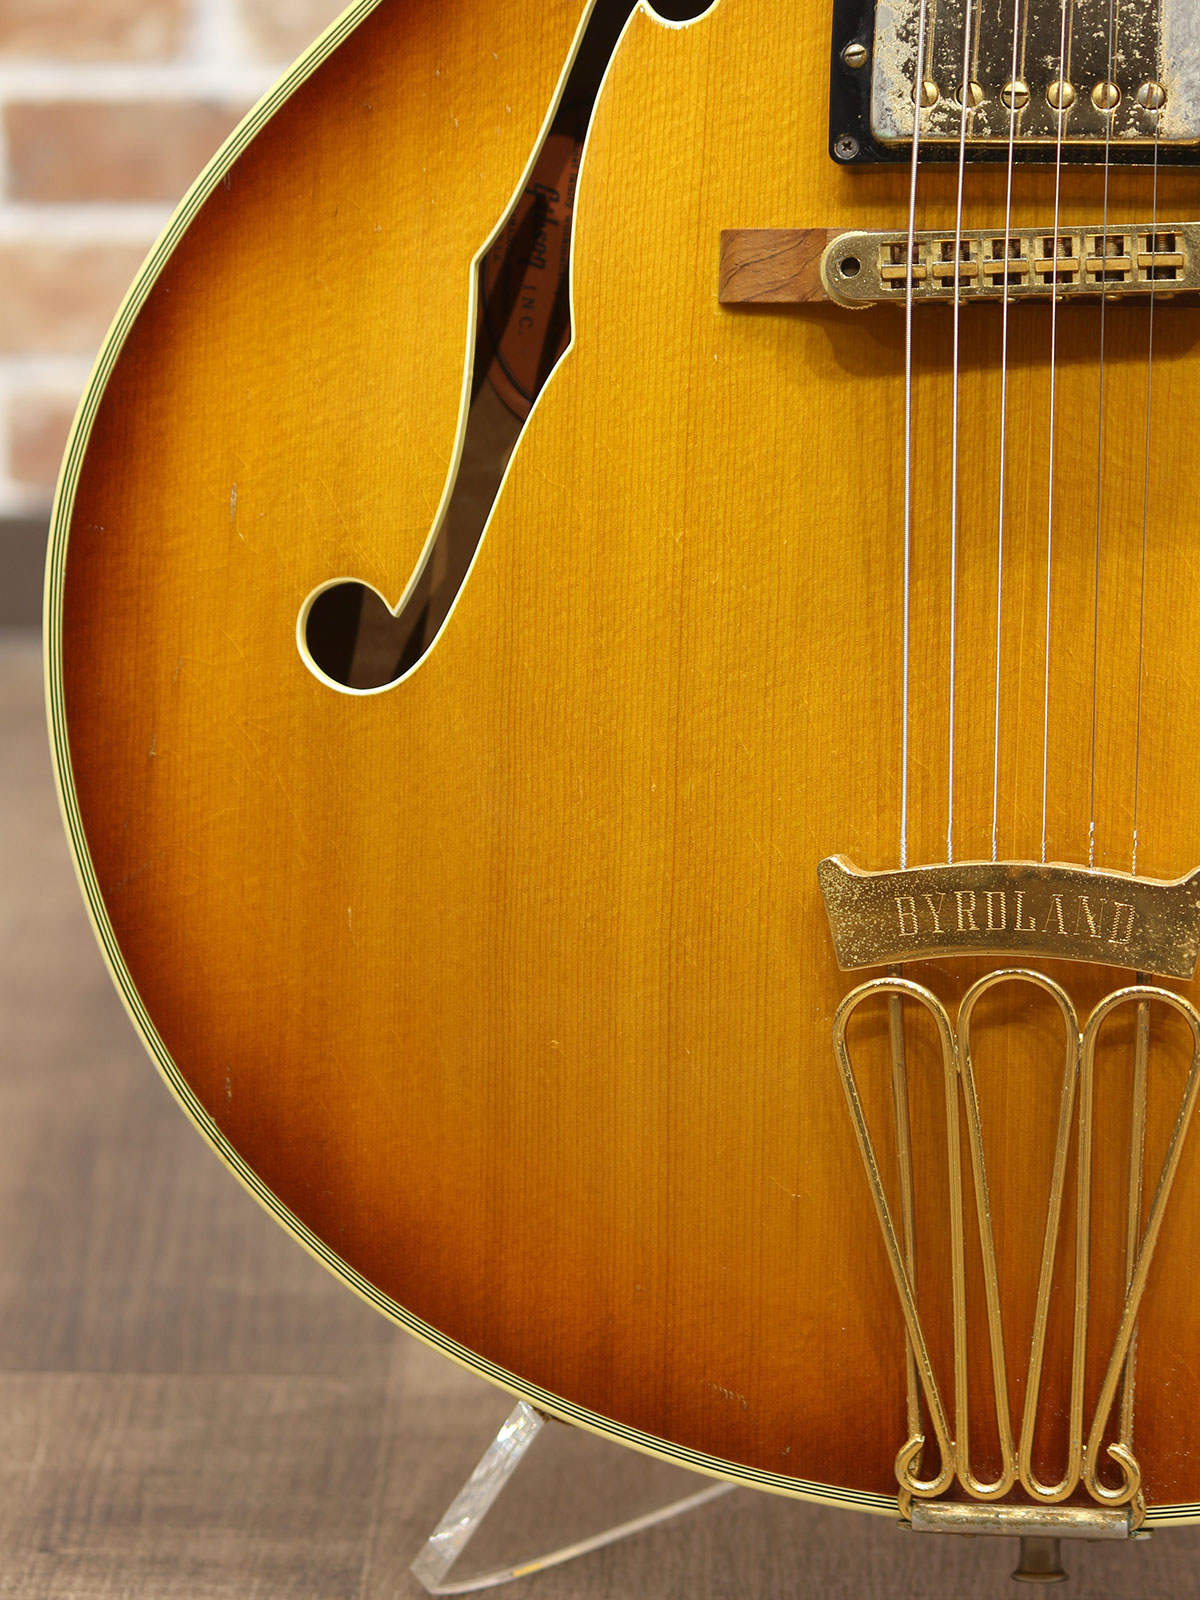 Gibson 1962-63 Byrdland ” owned by Jim Messina” - 20.jpg